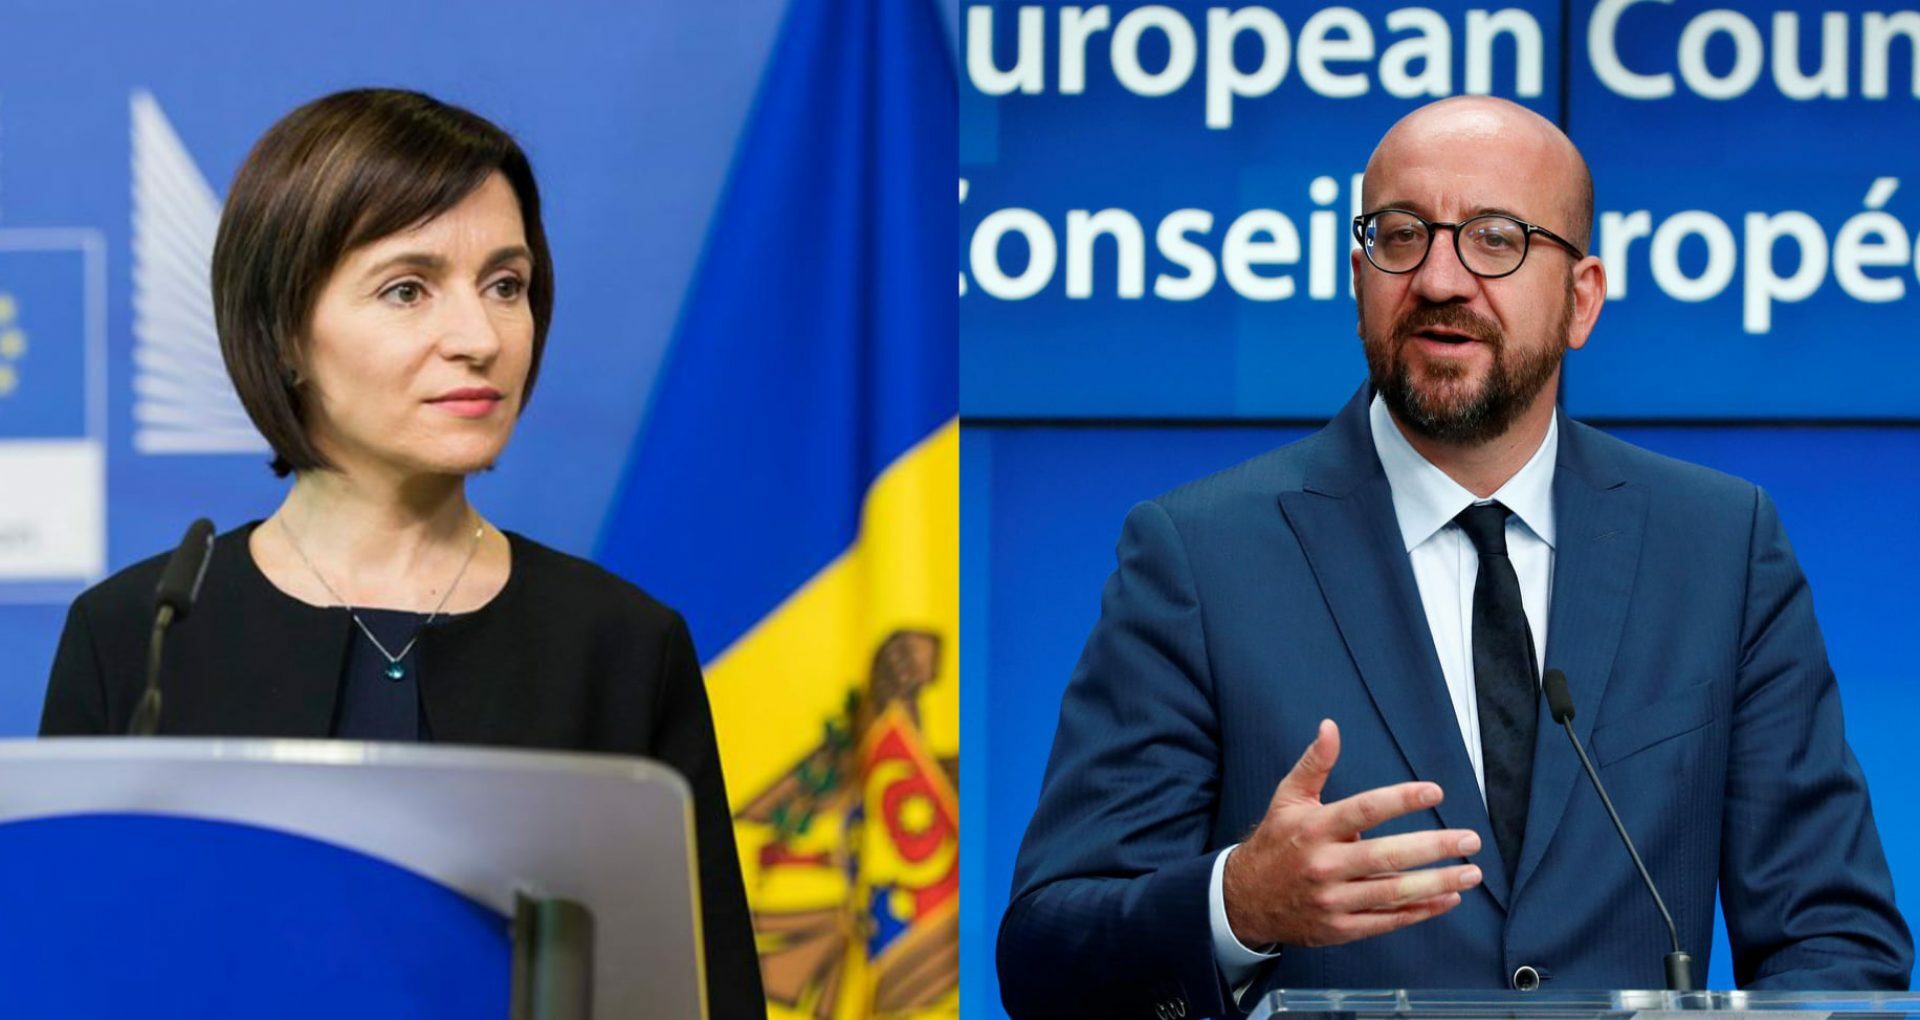 Maia Sandu had a Conversation with the President of the European Council, Charles Michel